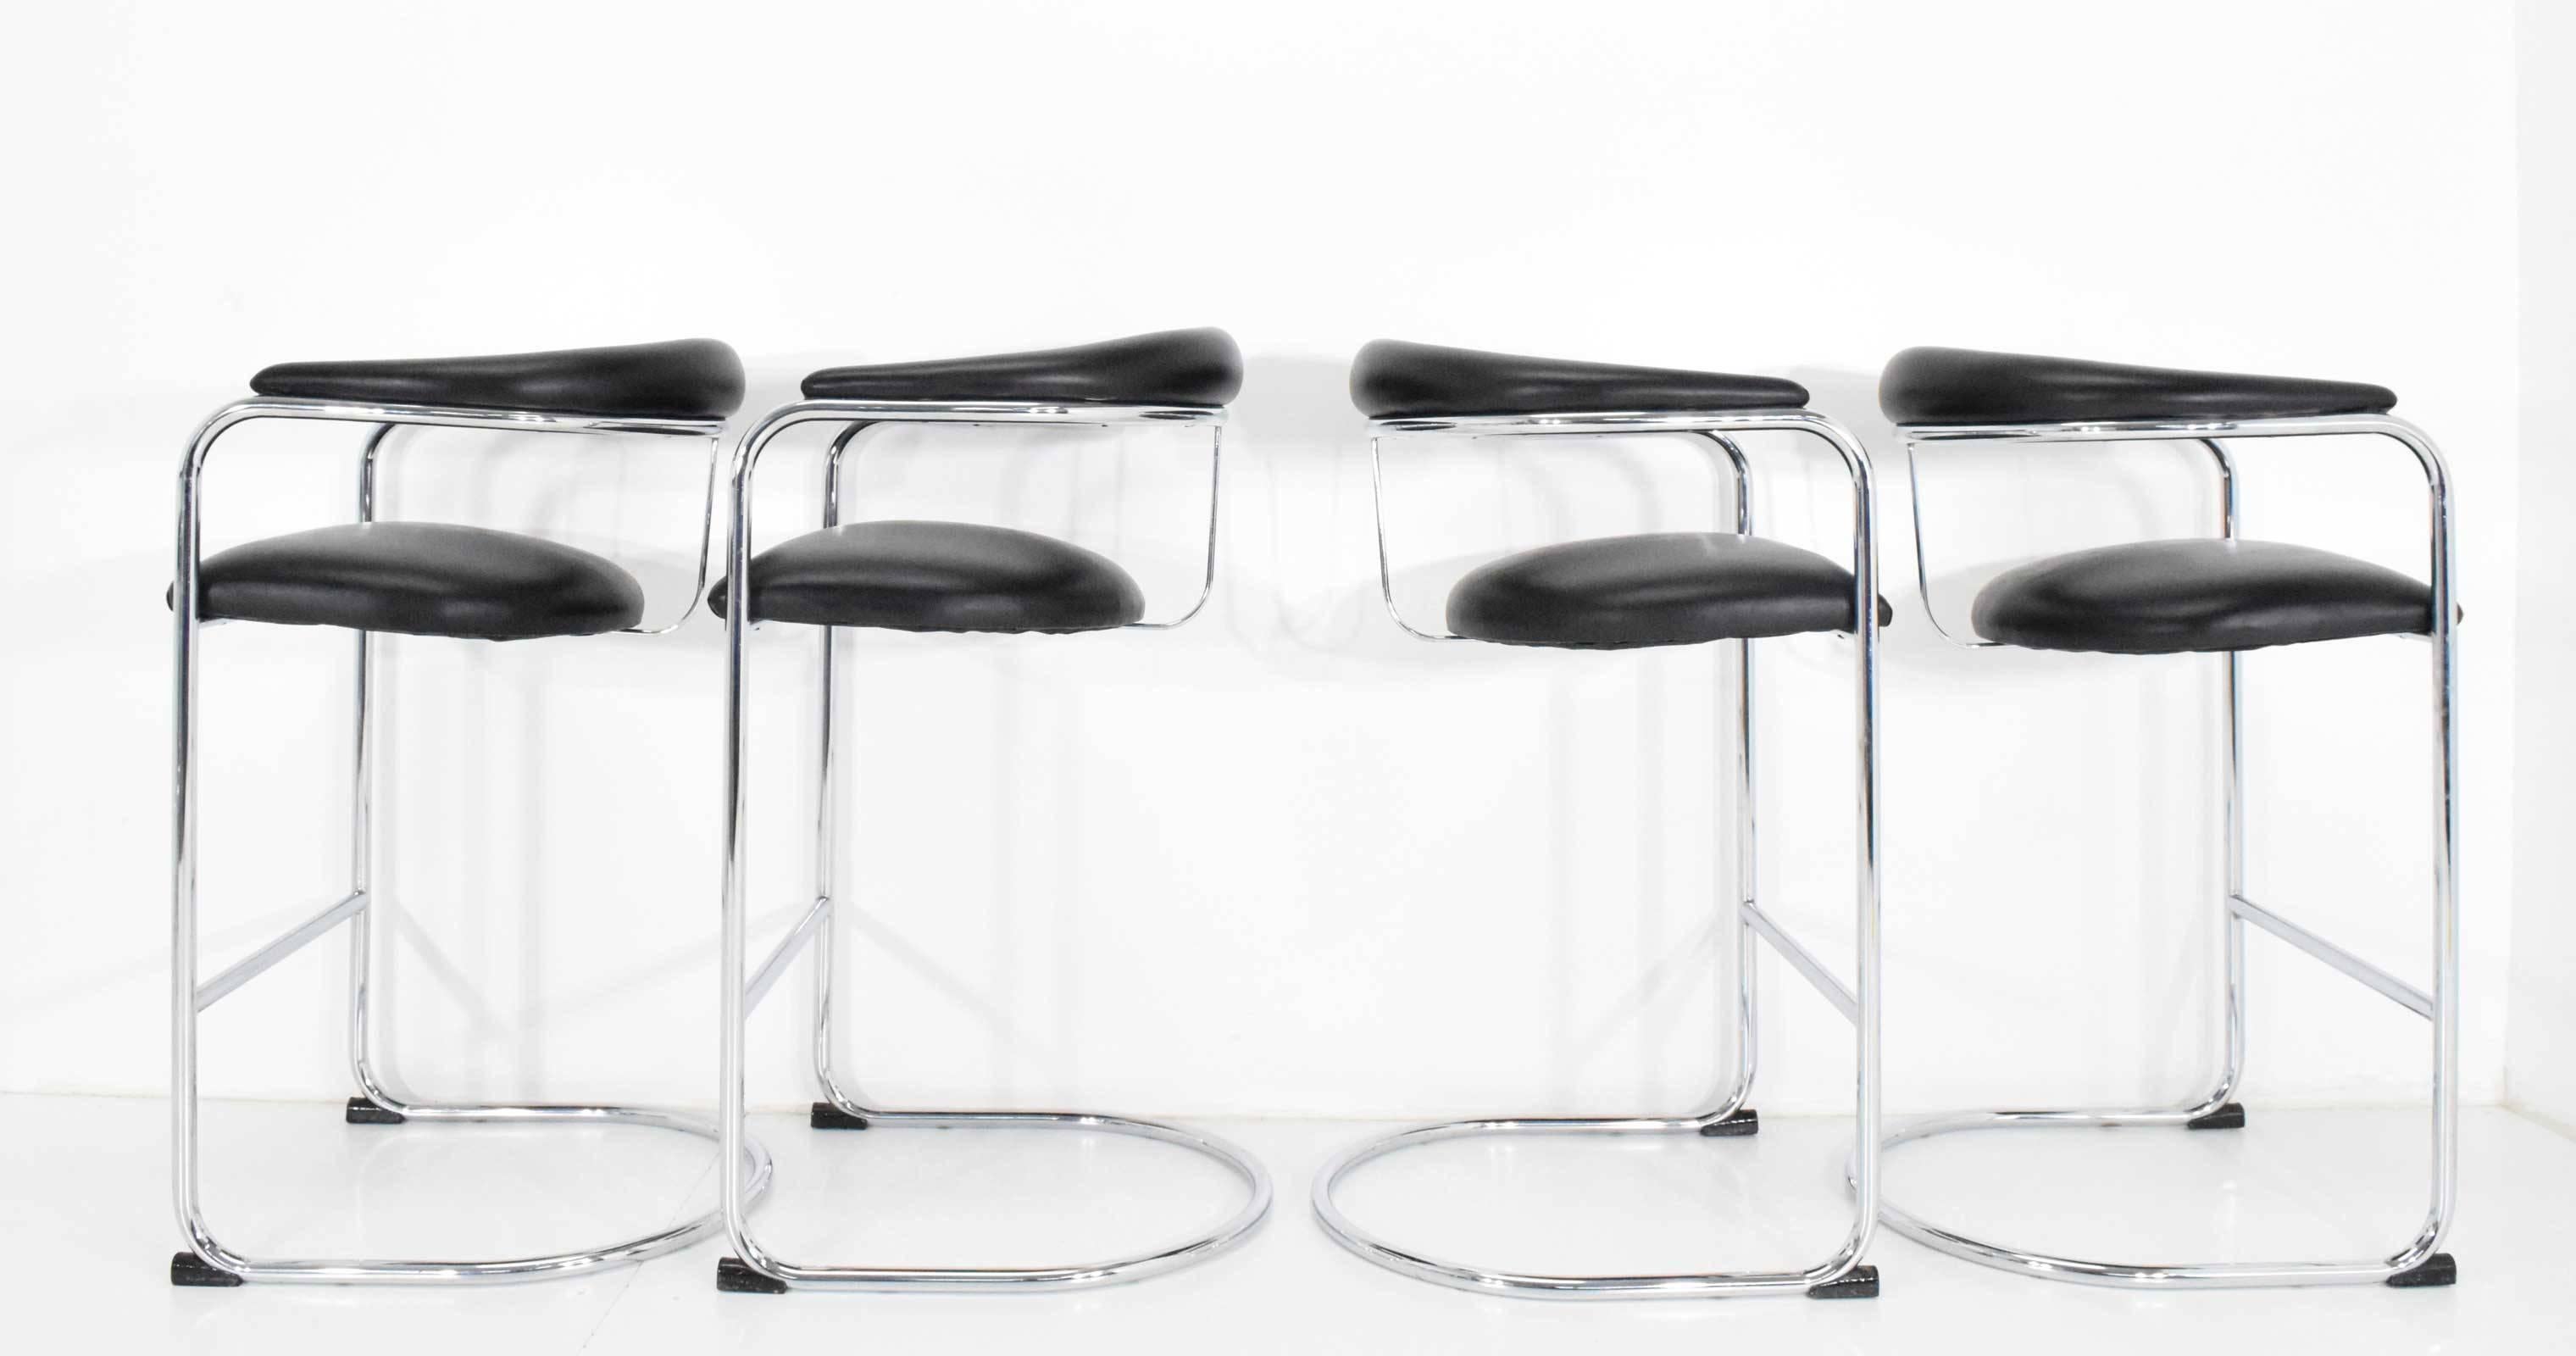 We have eight of these stools available. We also have another two in white under a separate listing. They are designed by Anton Lorenz for Thonet. Chairs are in beautiful condition with shiny chrome frames and a black faux leather seat and back. 